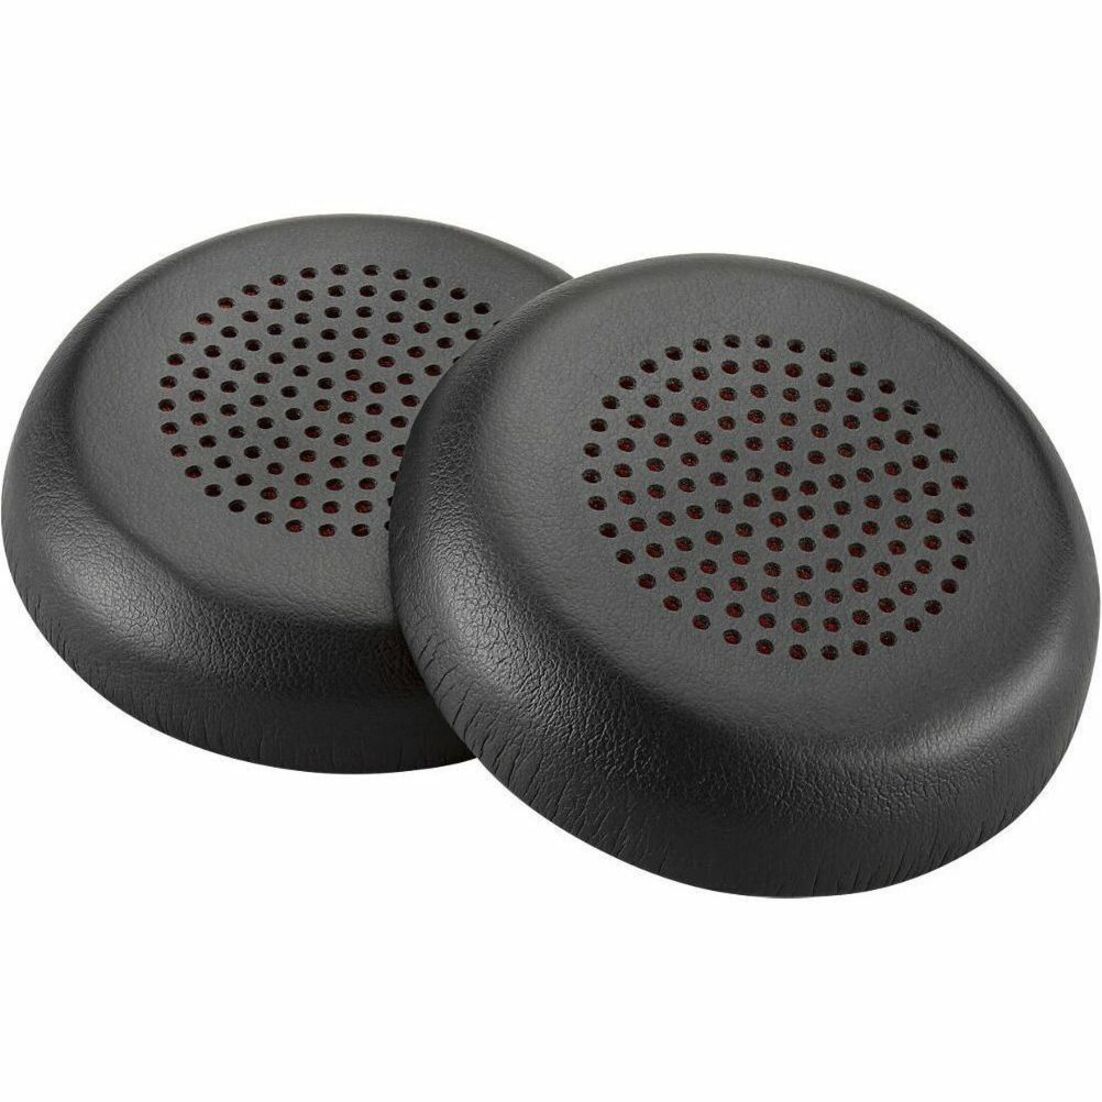 Poly 220484-01 VOYAGER FOCUS 2 EAR CUSHIONS, Black Leatherette, Pack of 2